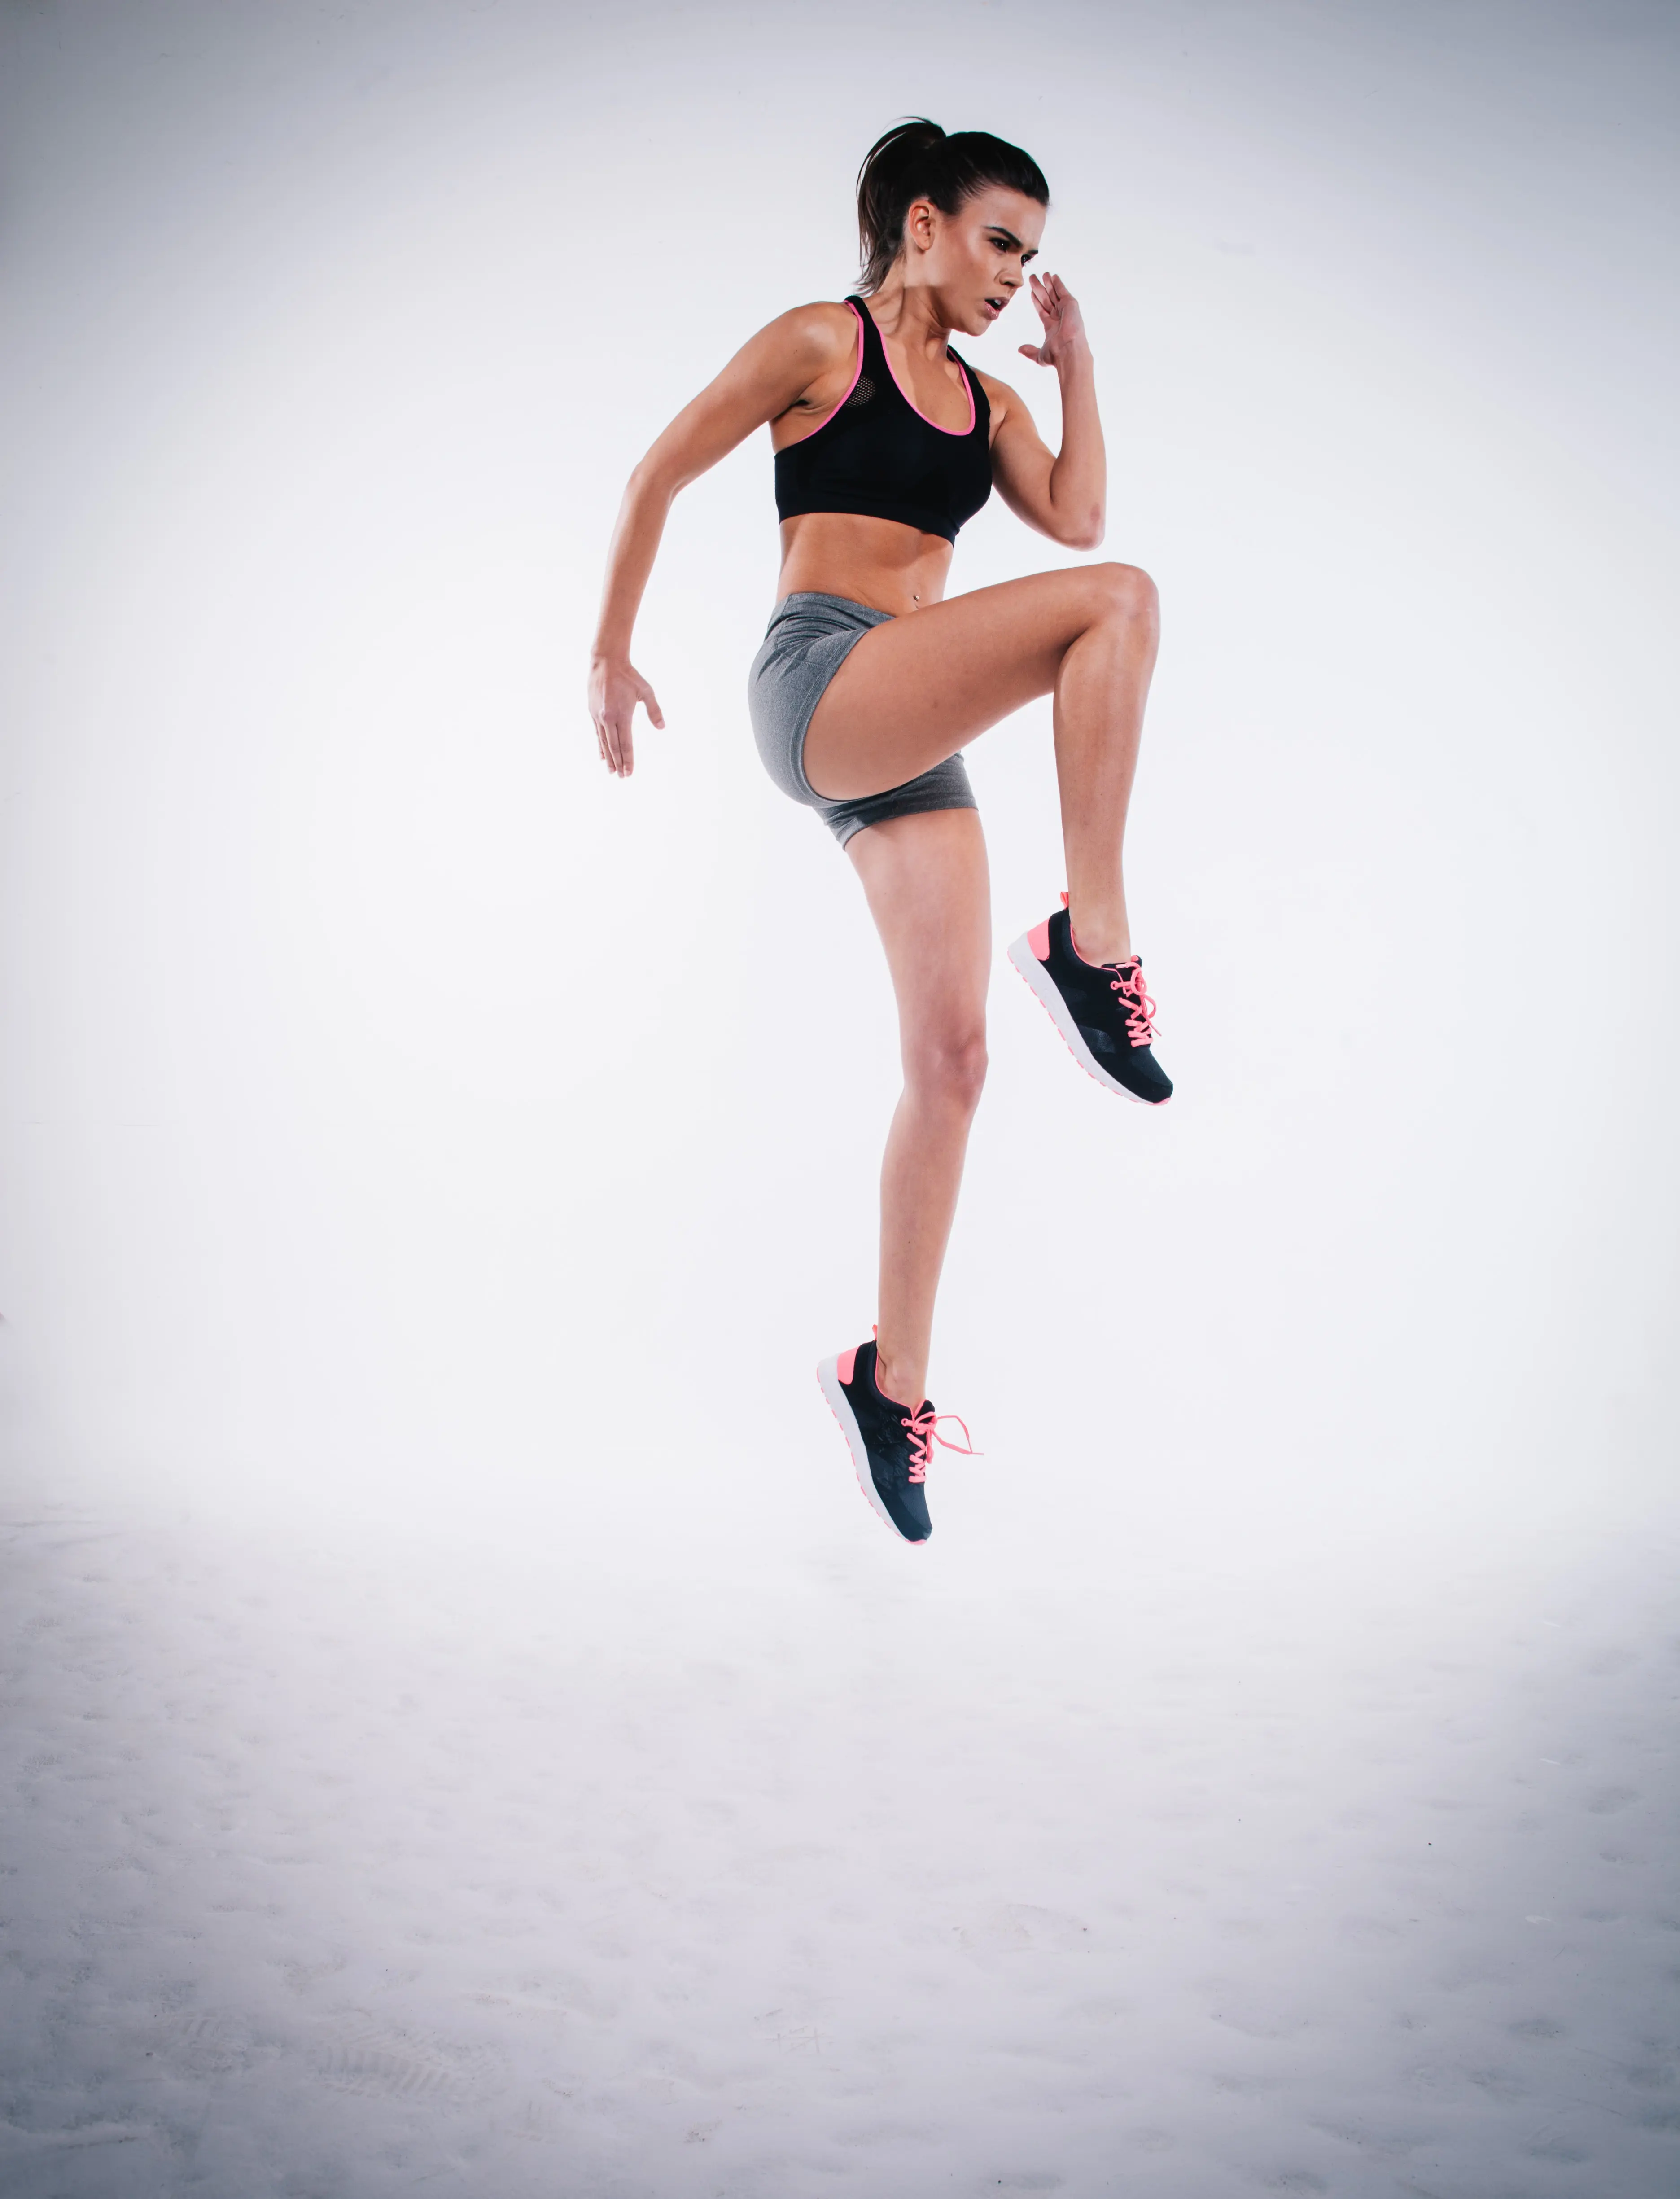 Woman doing a jump lunge in front of a white wall